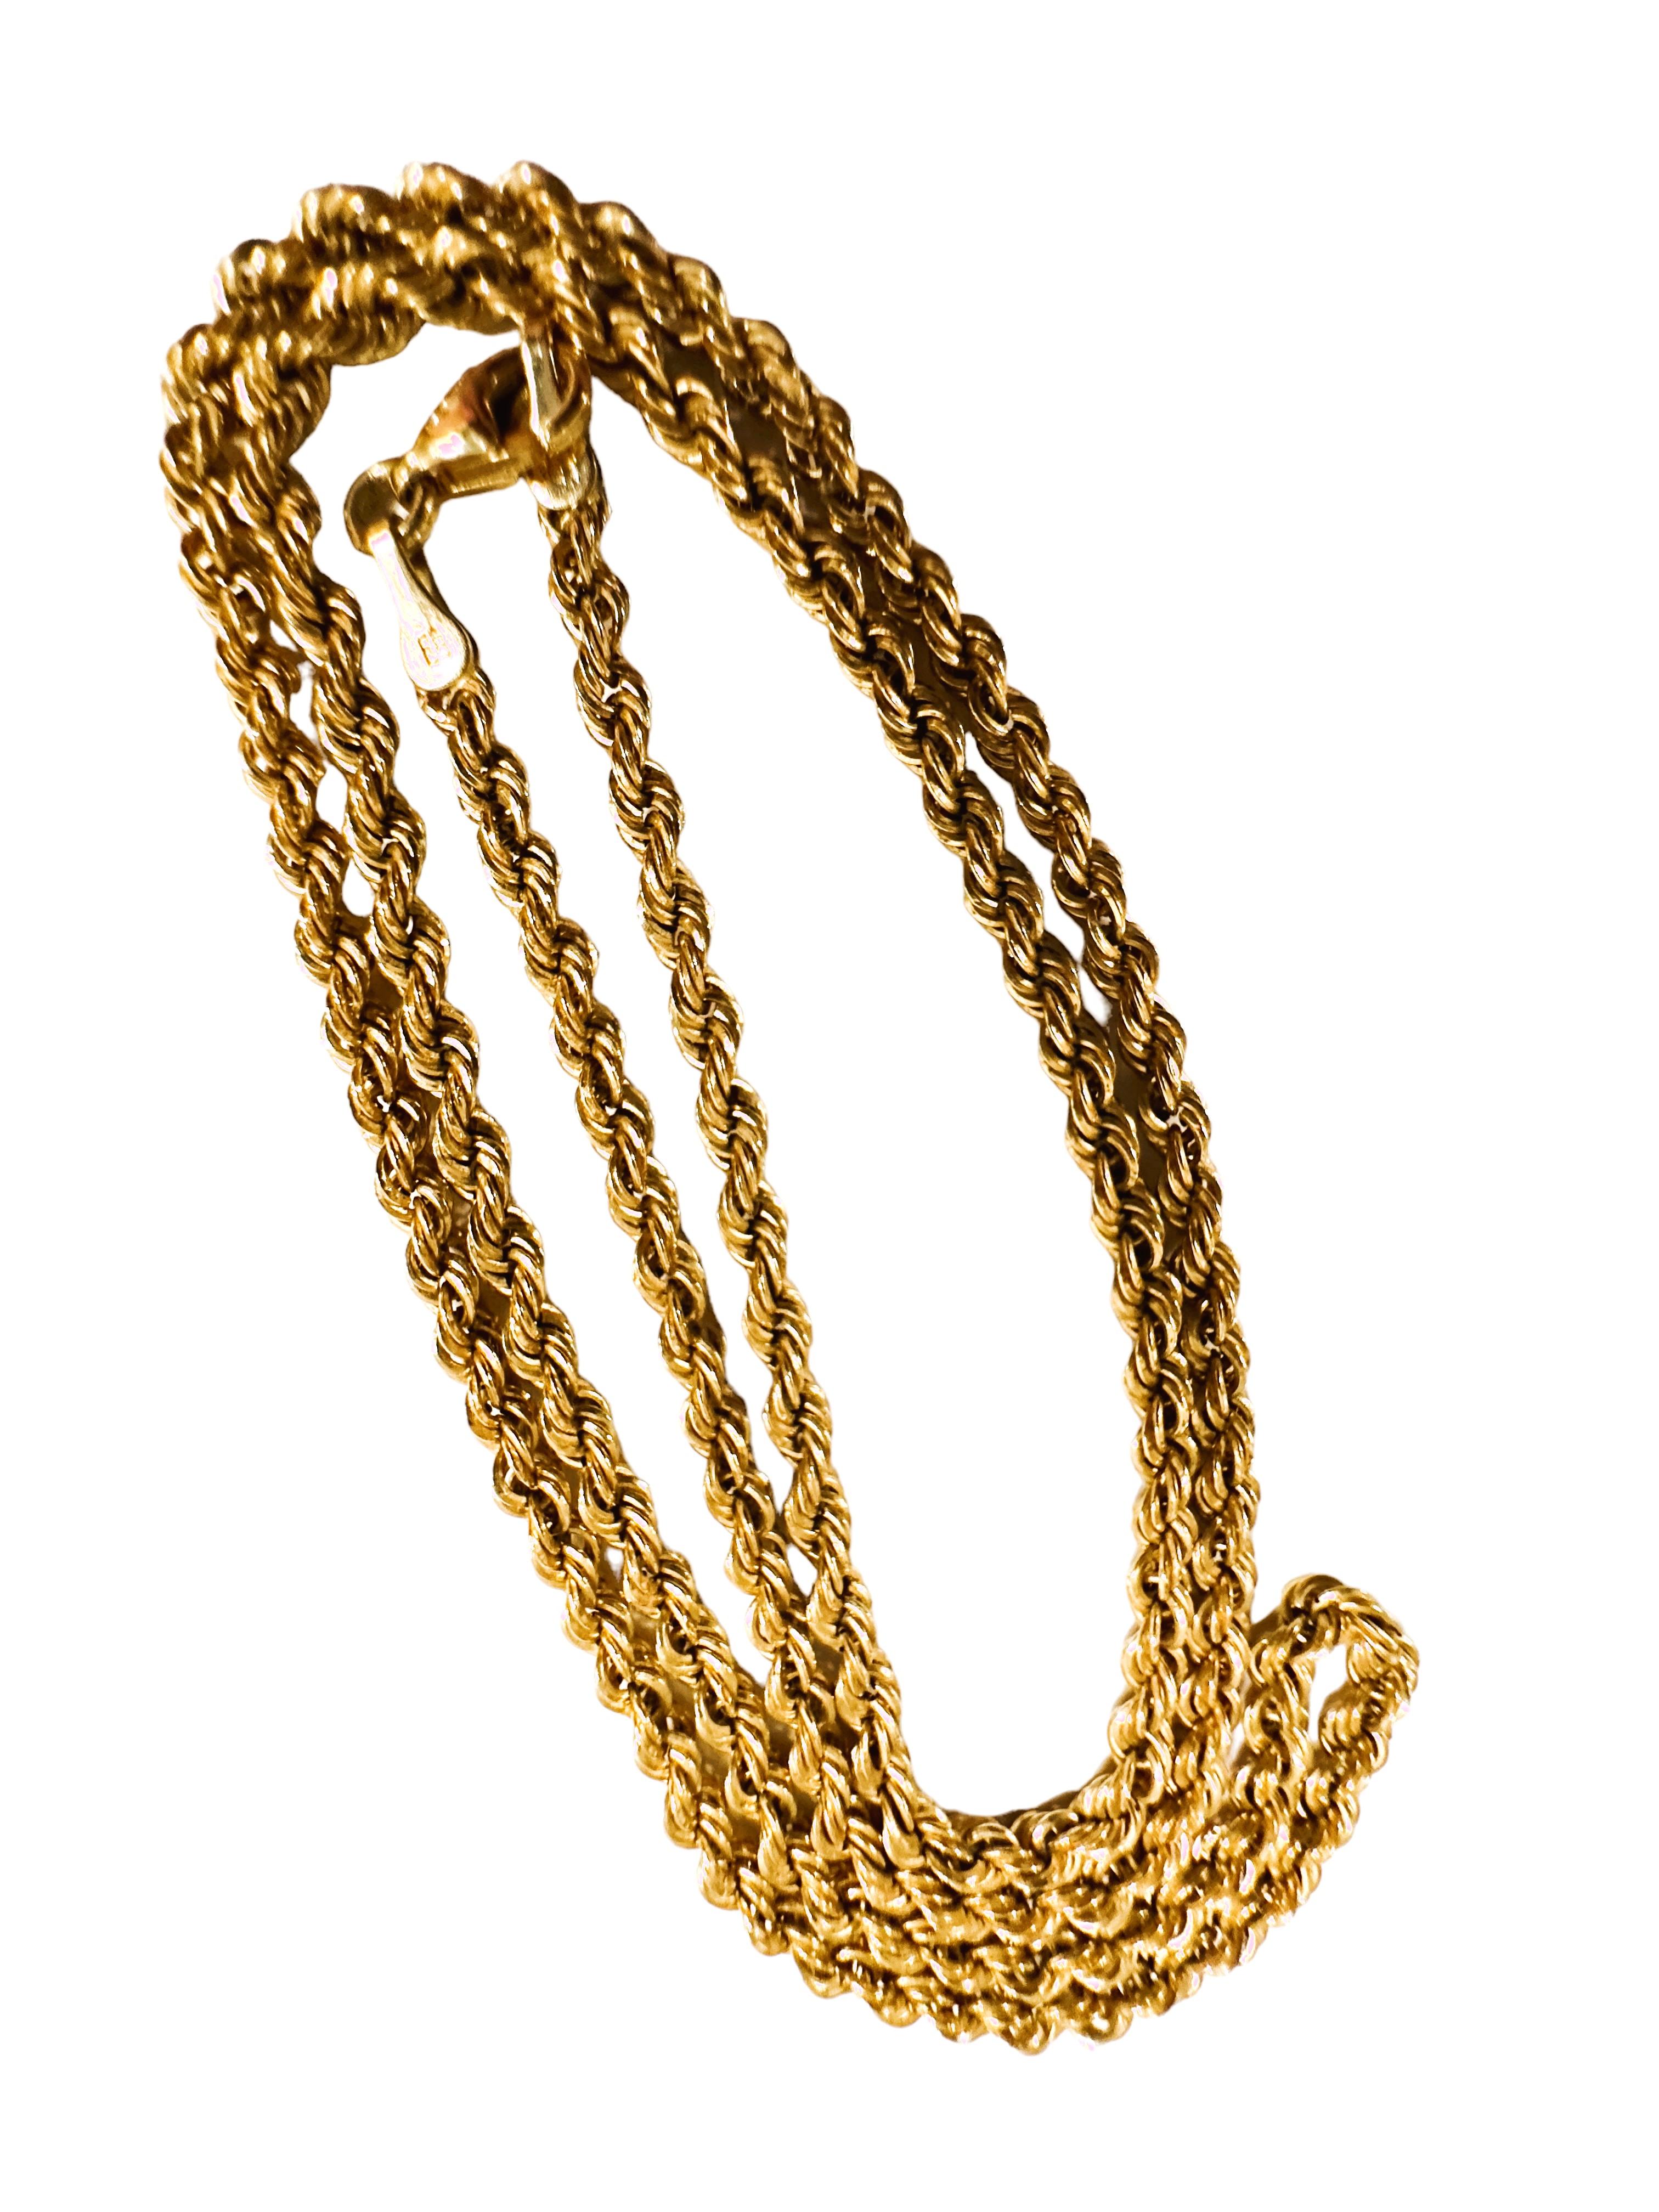 18K Yellow Gold Italian Milor Rope Chain 20 Inches 4.34 Grams 2